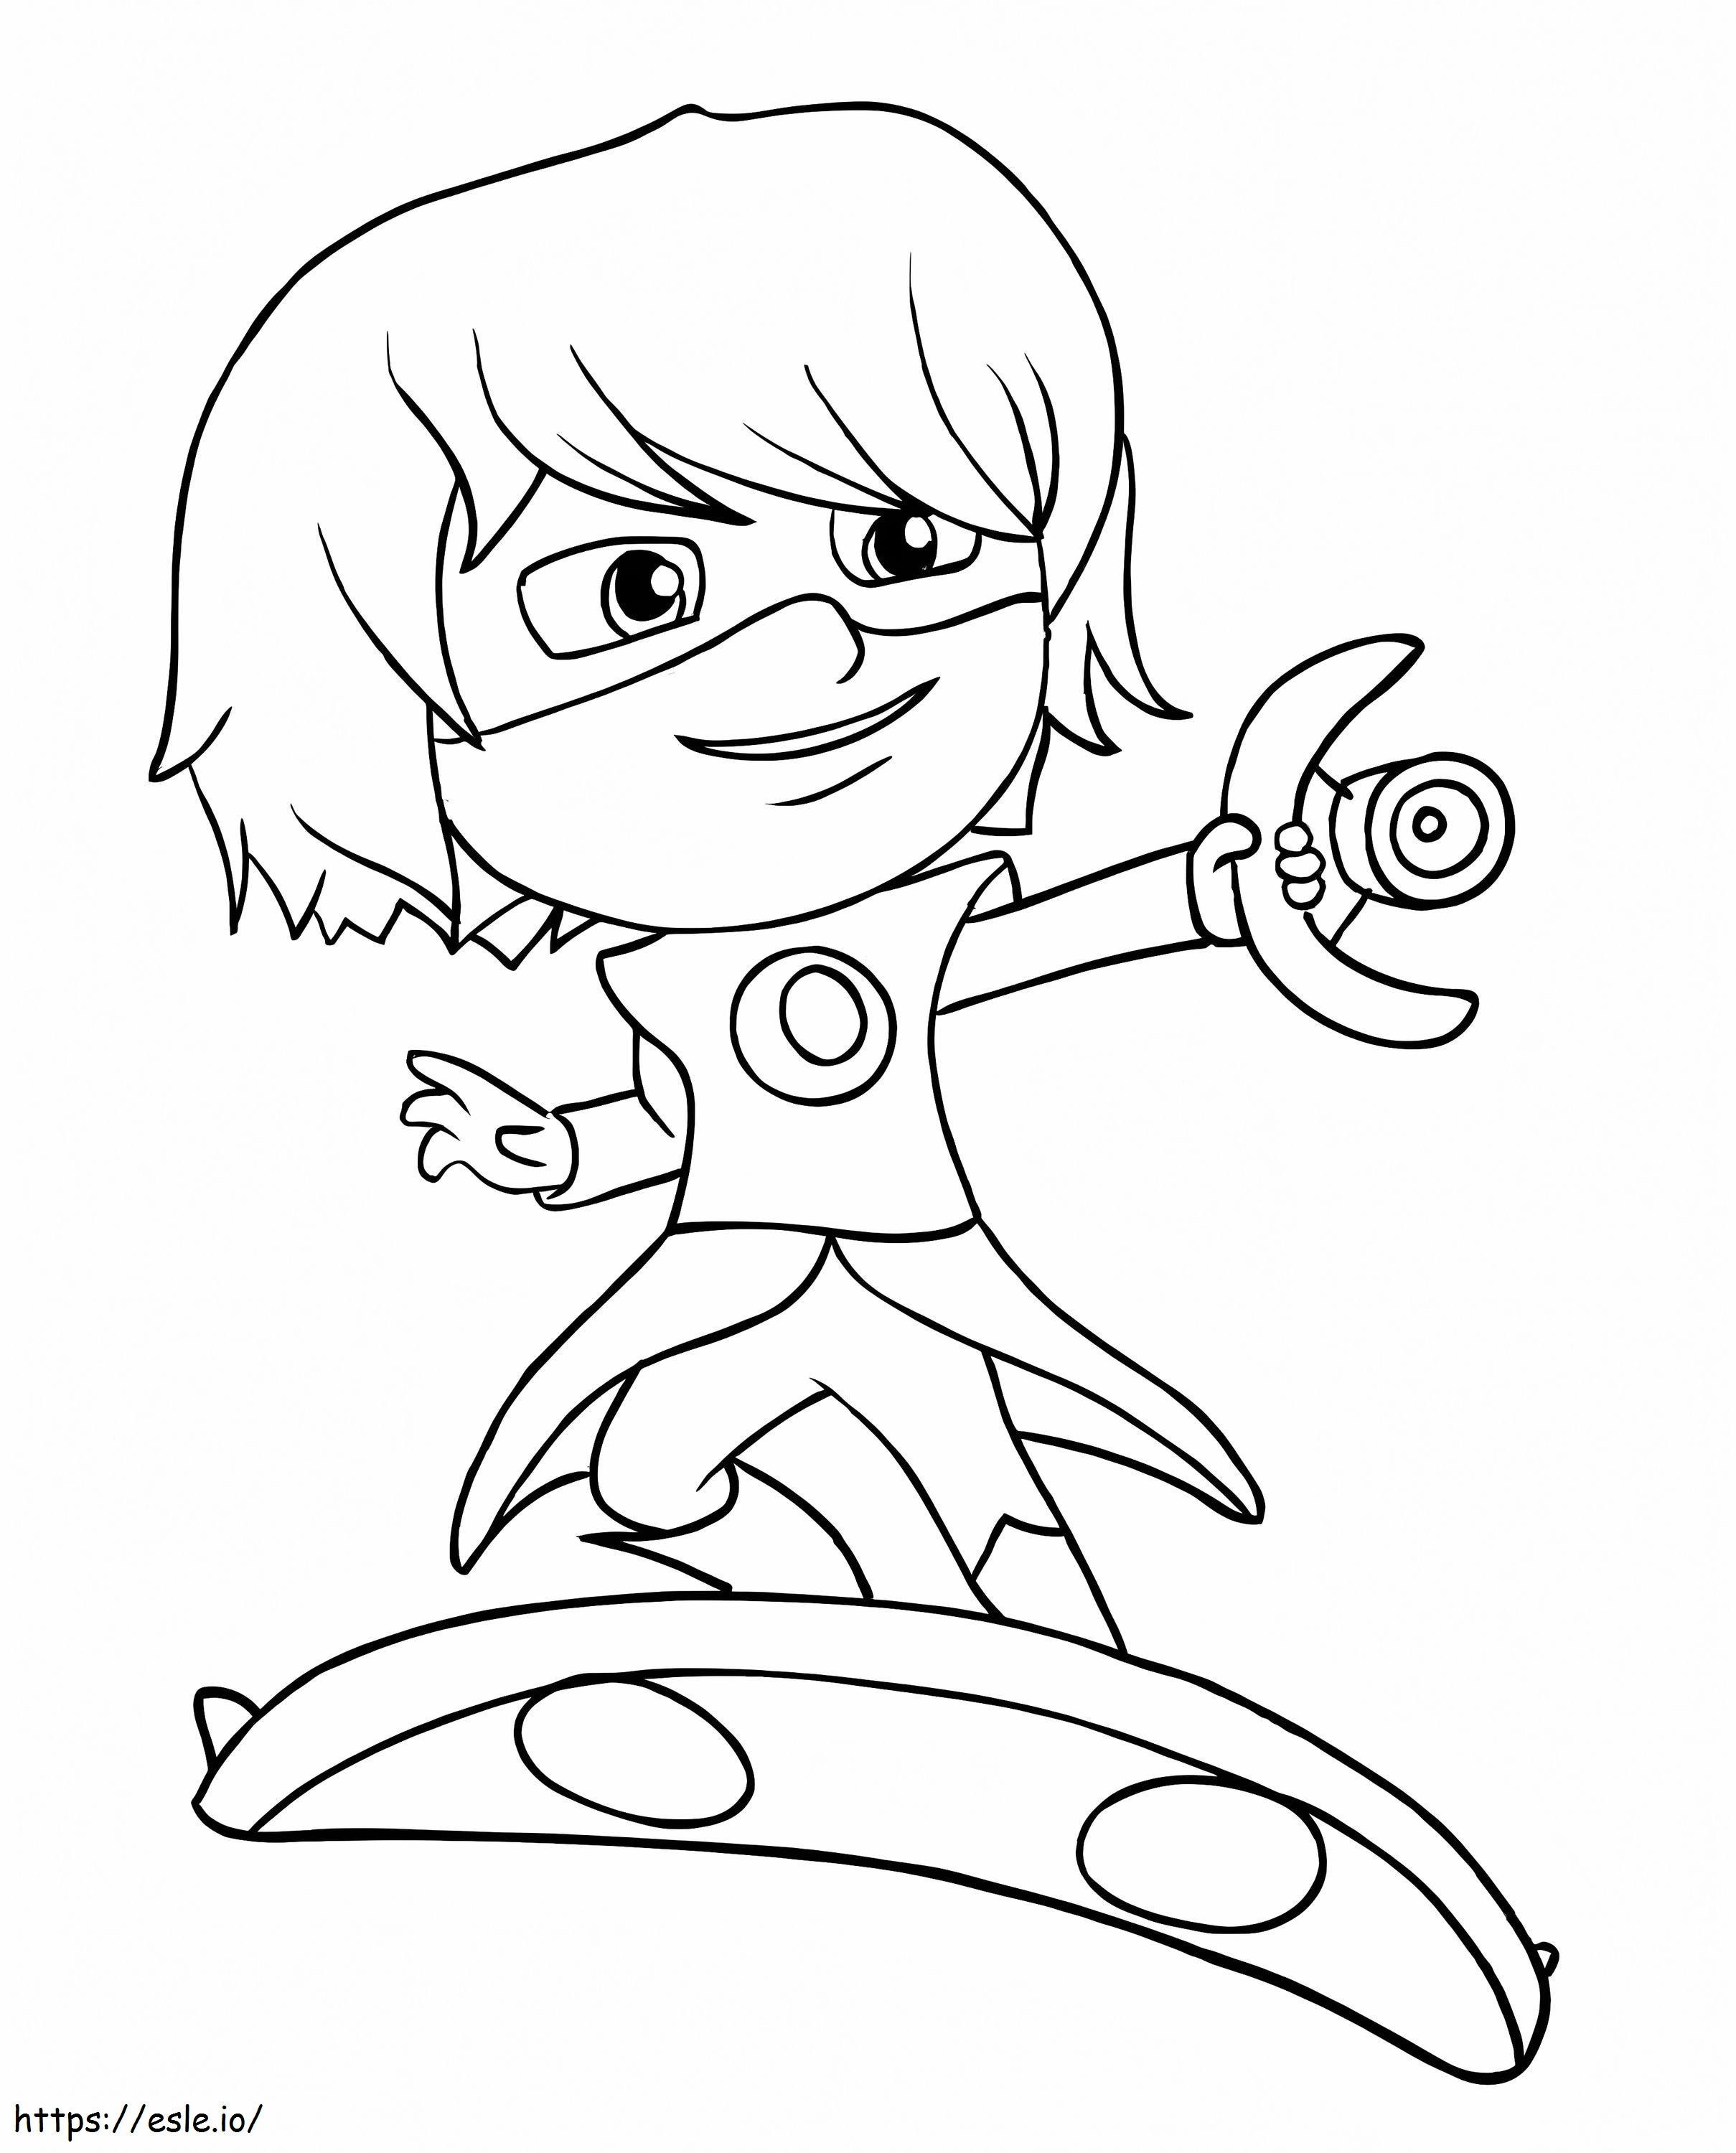 PJ Masks Witch coloring page